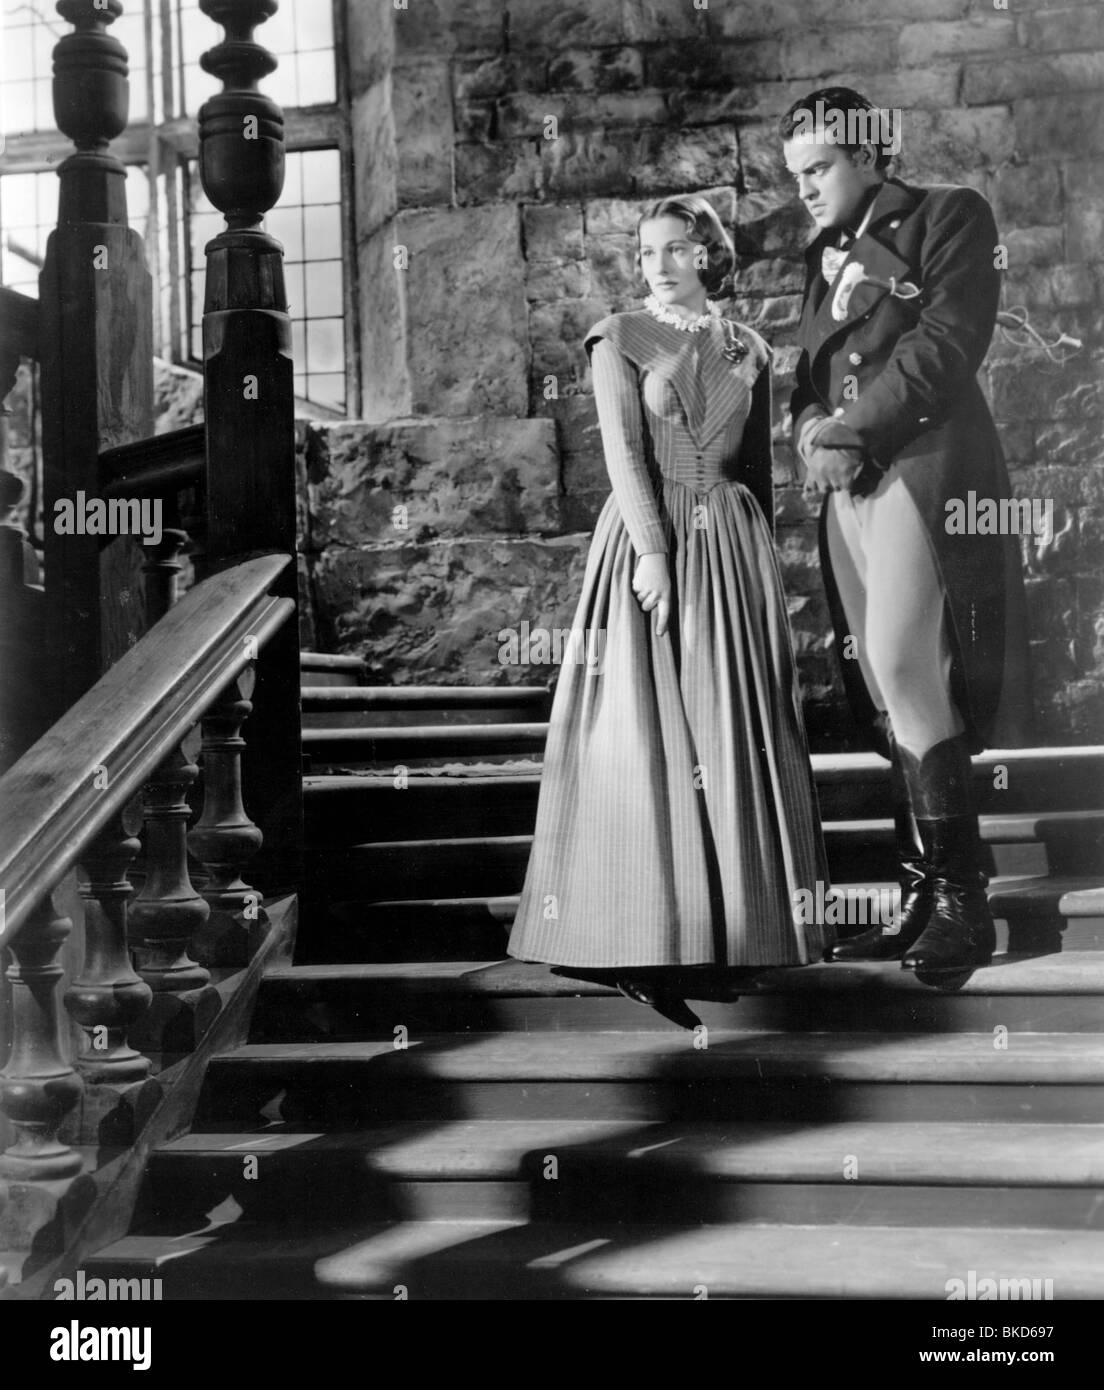 JANE EYRE (1943) JOAN FONTAINE, ORSON WELLES JEY 004P Stockfoto